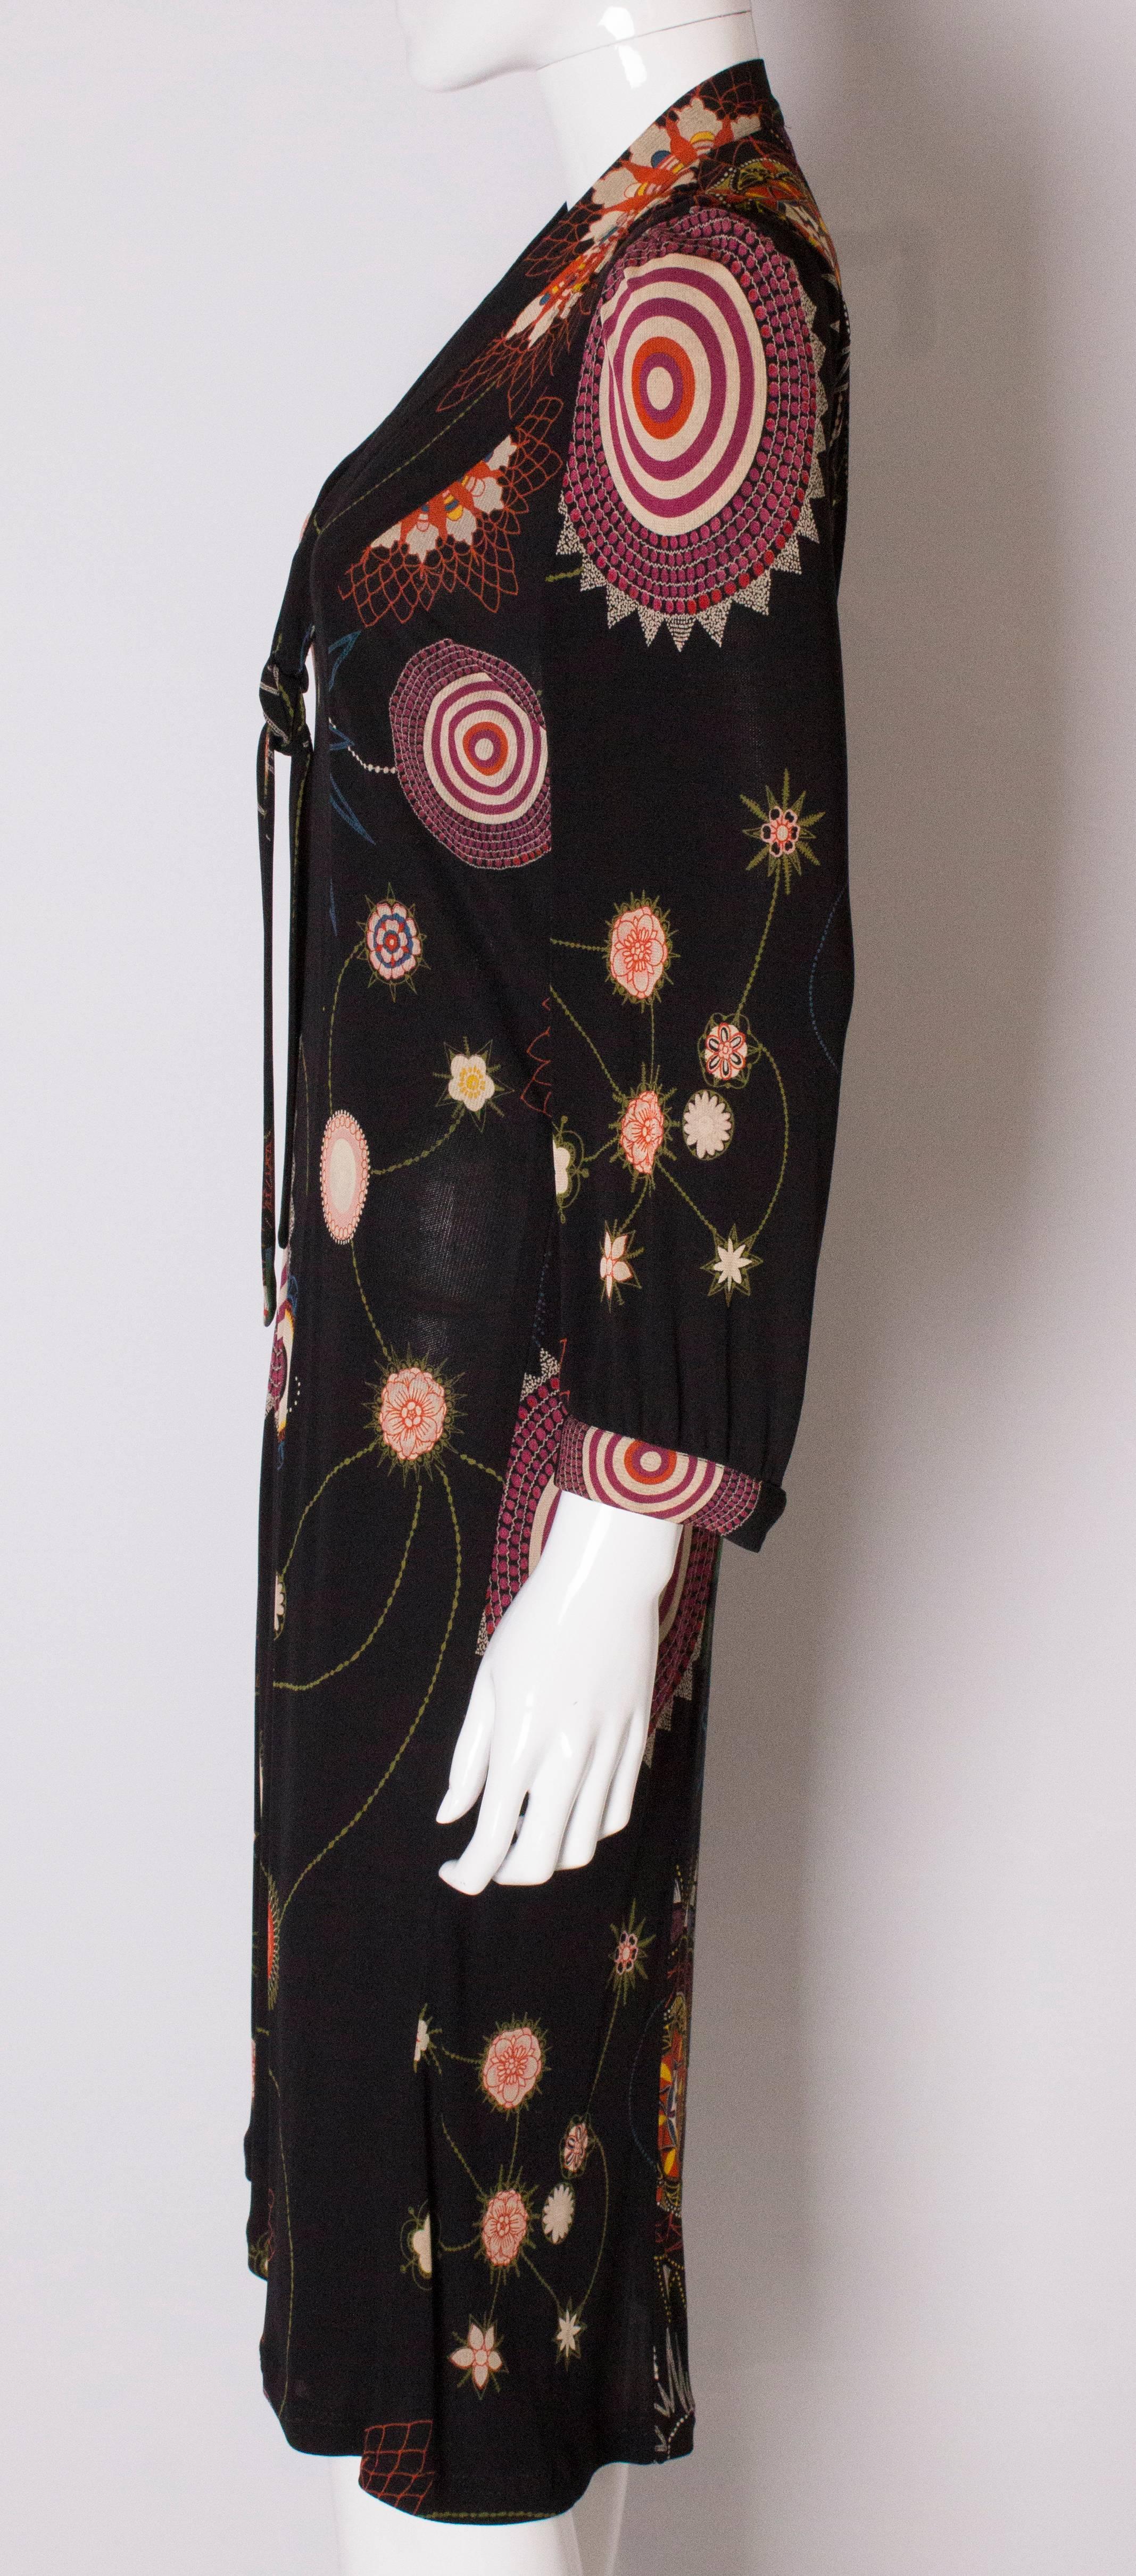 A Vintage 2000 printed  Dress by Christian Lacroix 1